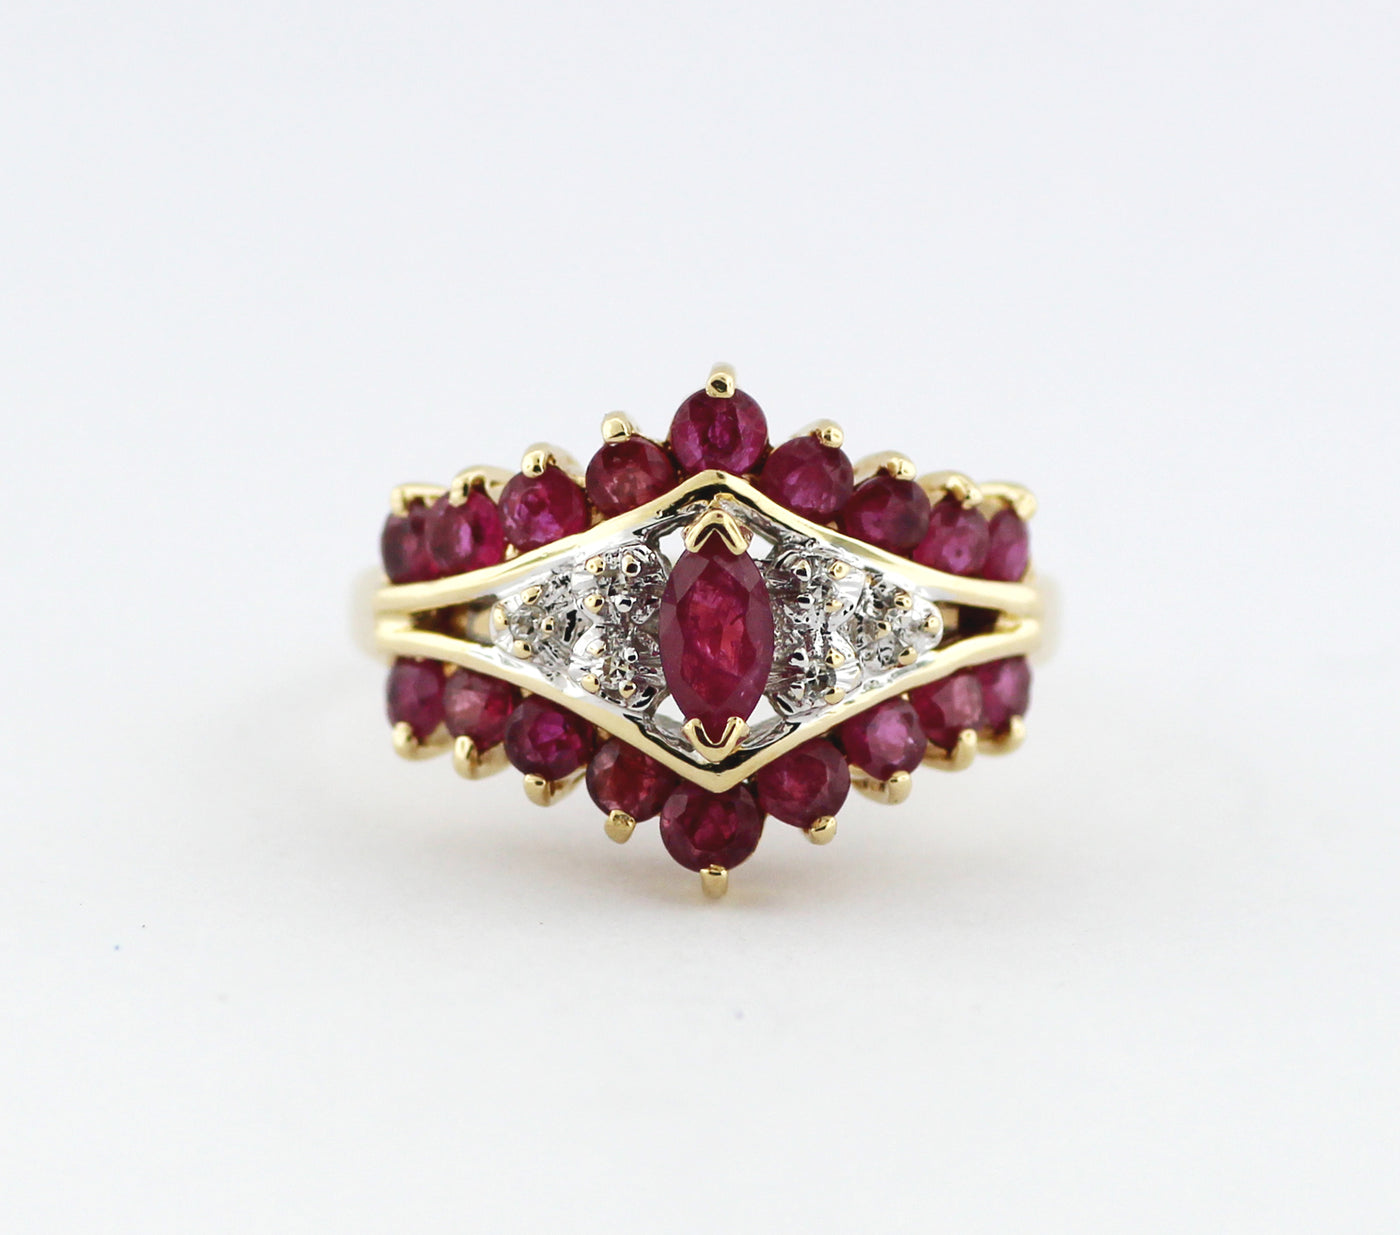 ESTATE 14KY 1.07 CTTW RUBY AND DIAMOND RING .04 CTTW